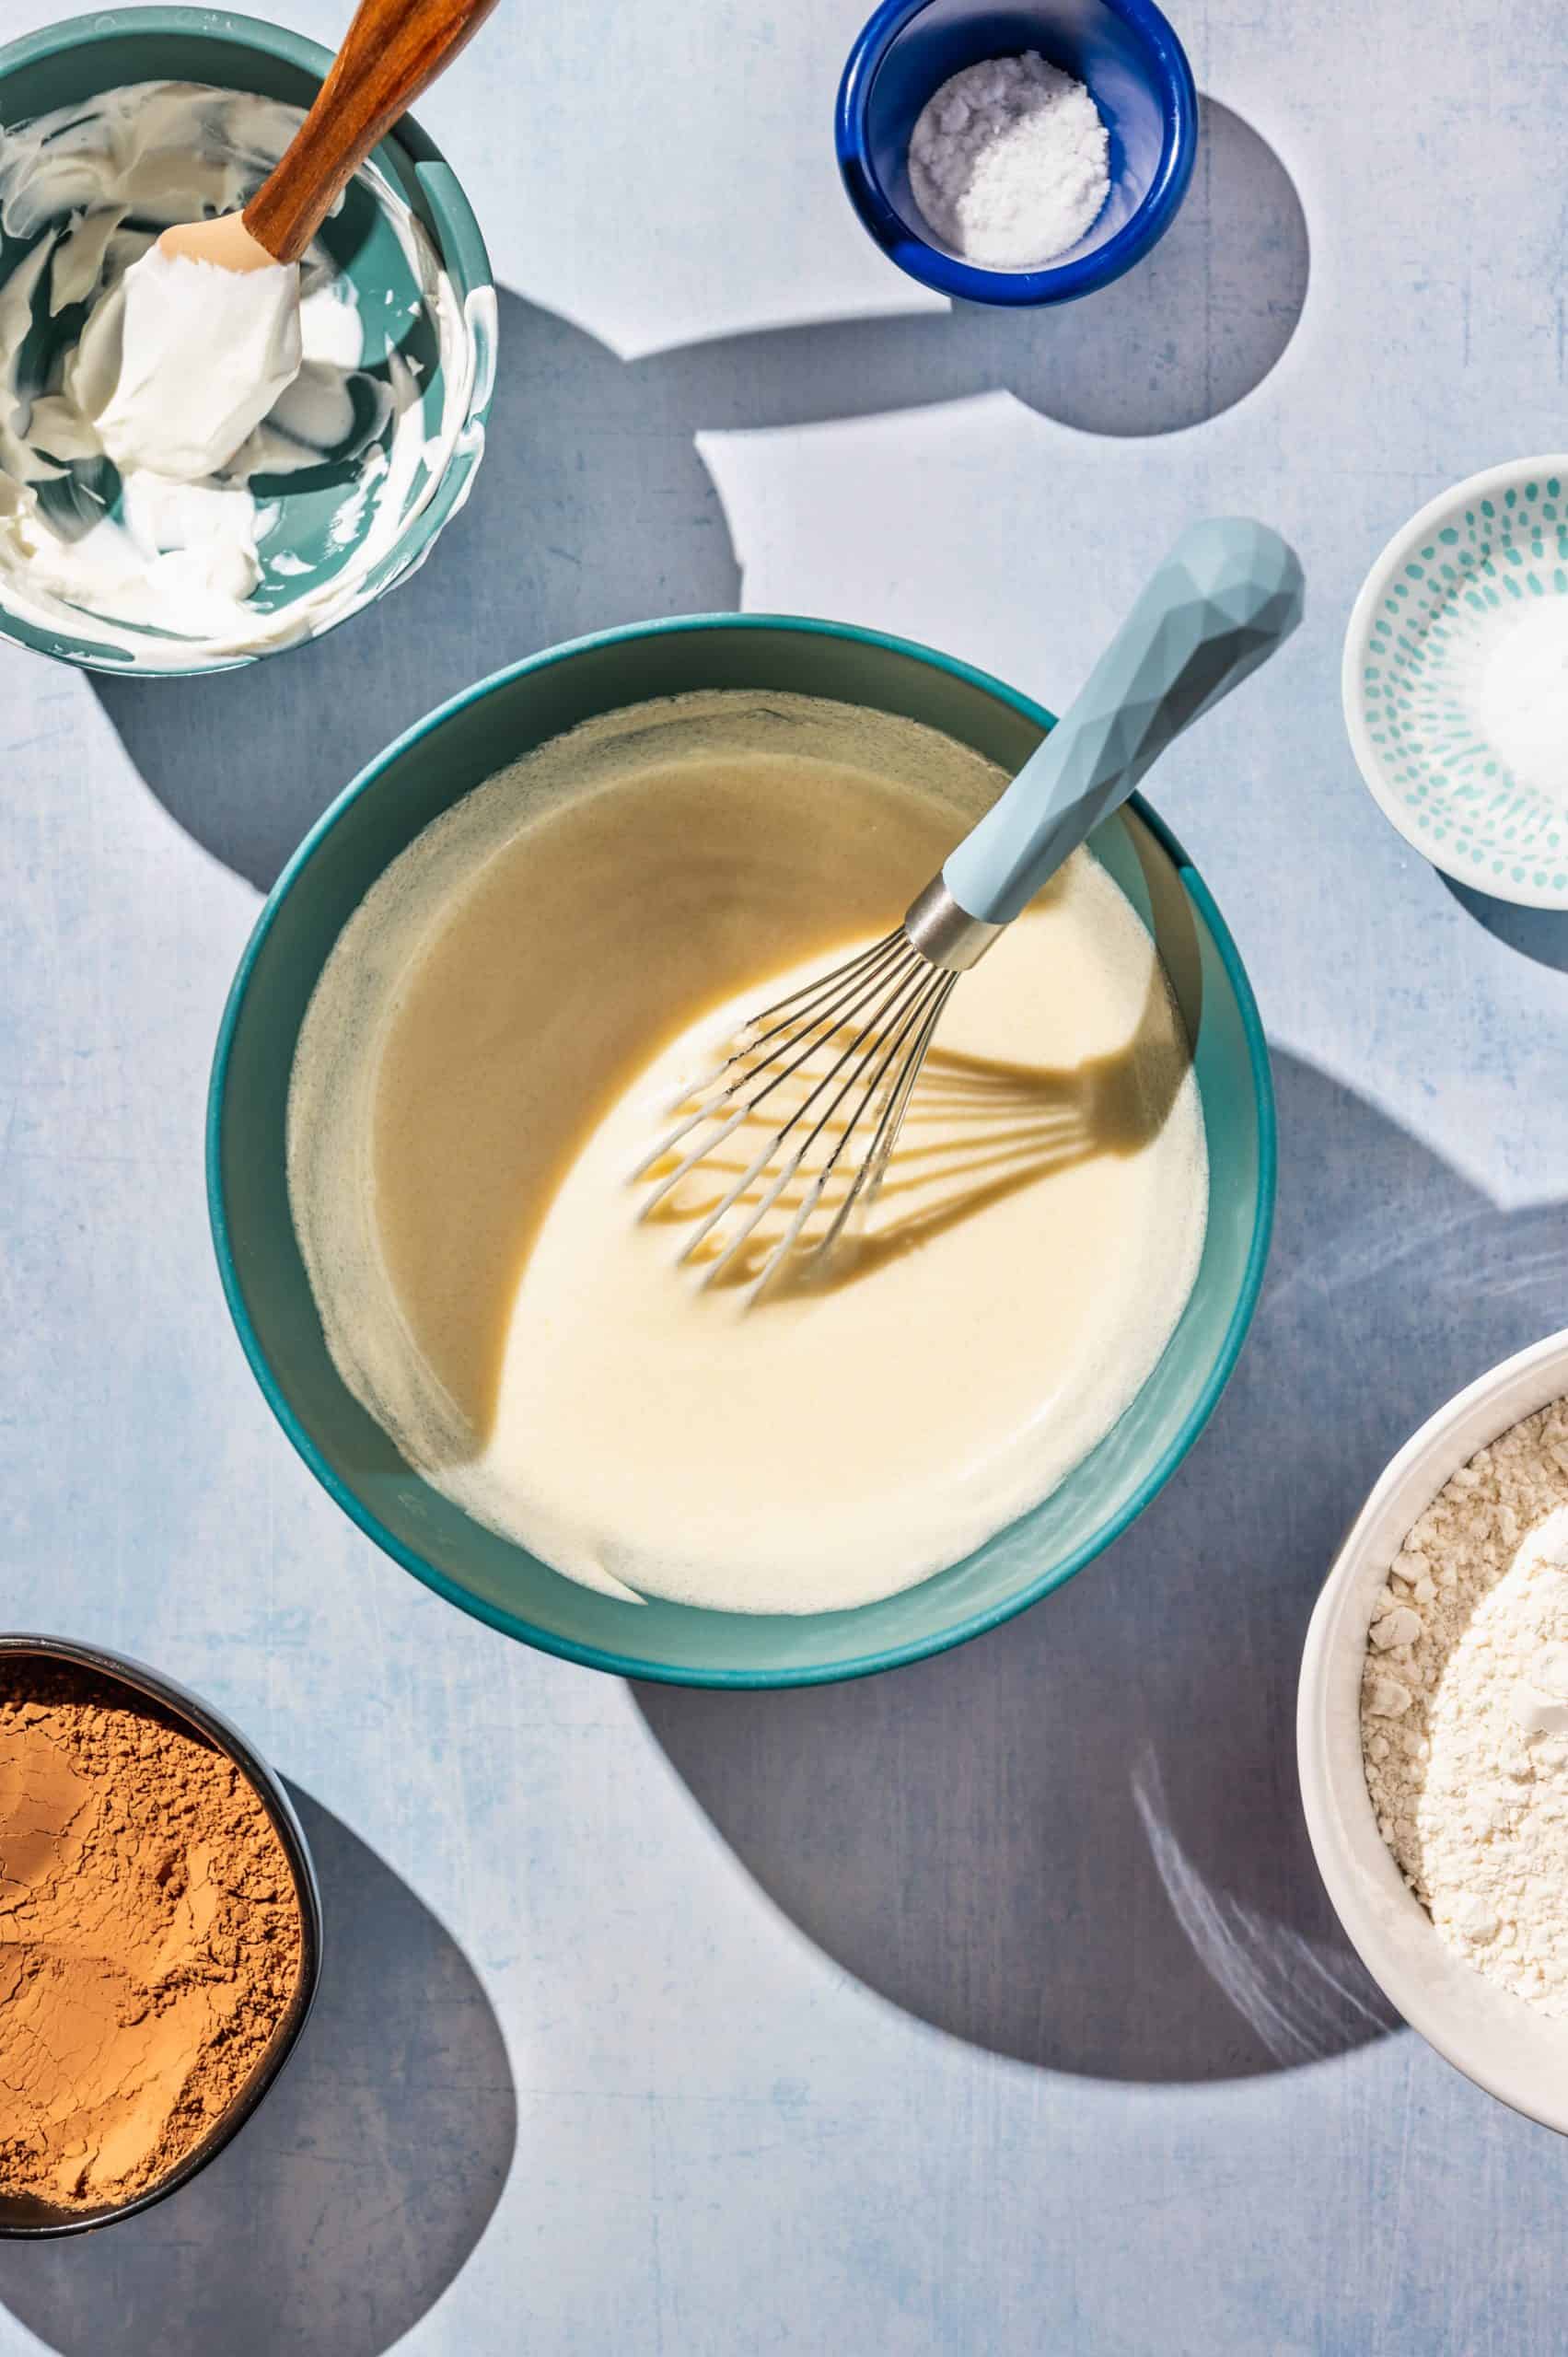 yellowish creamy mixture in a mixing bowl with a whisk